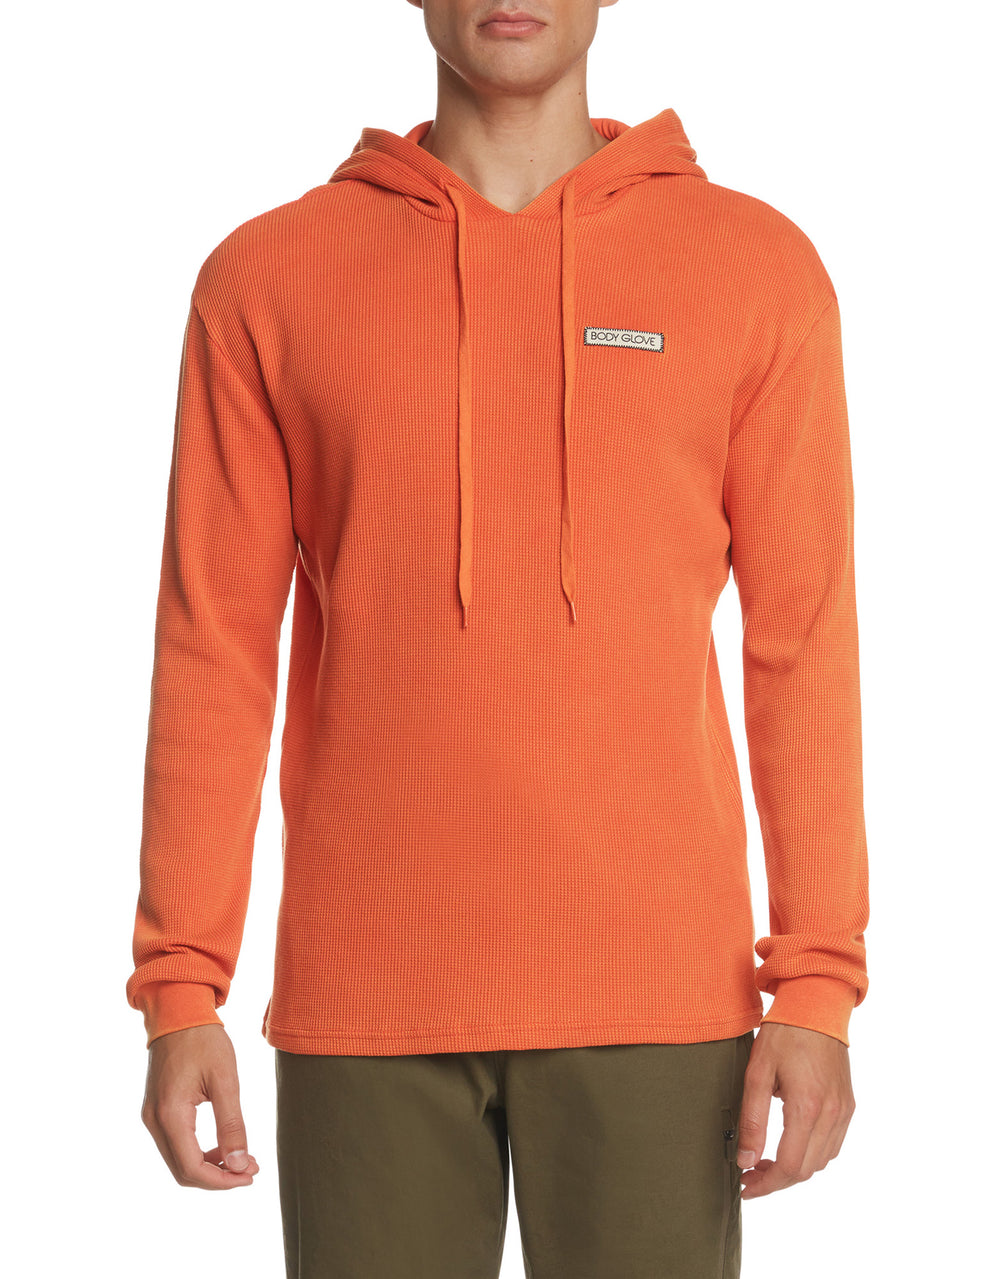 Stand Out Long-Sleeve Thermal with Hoodie - Burnt Brick